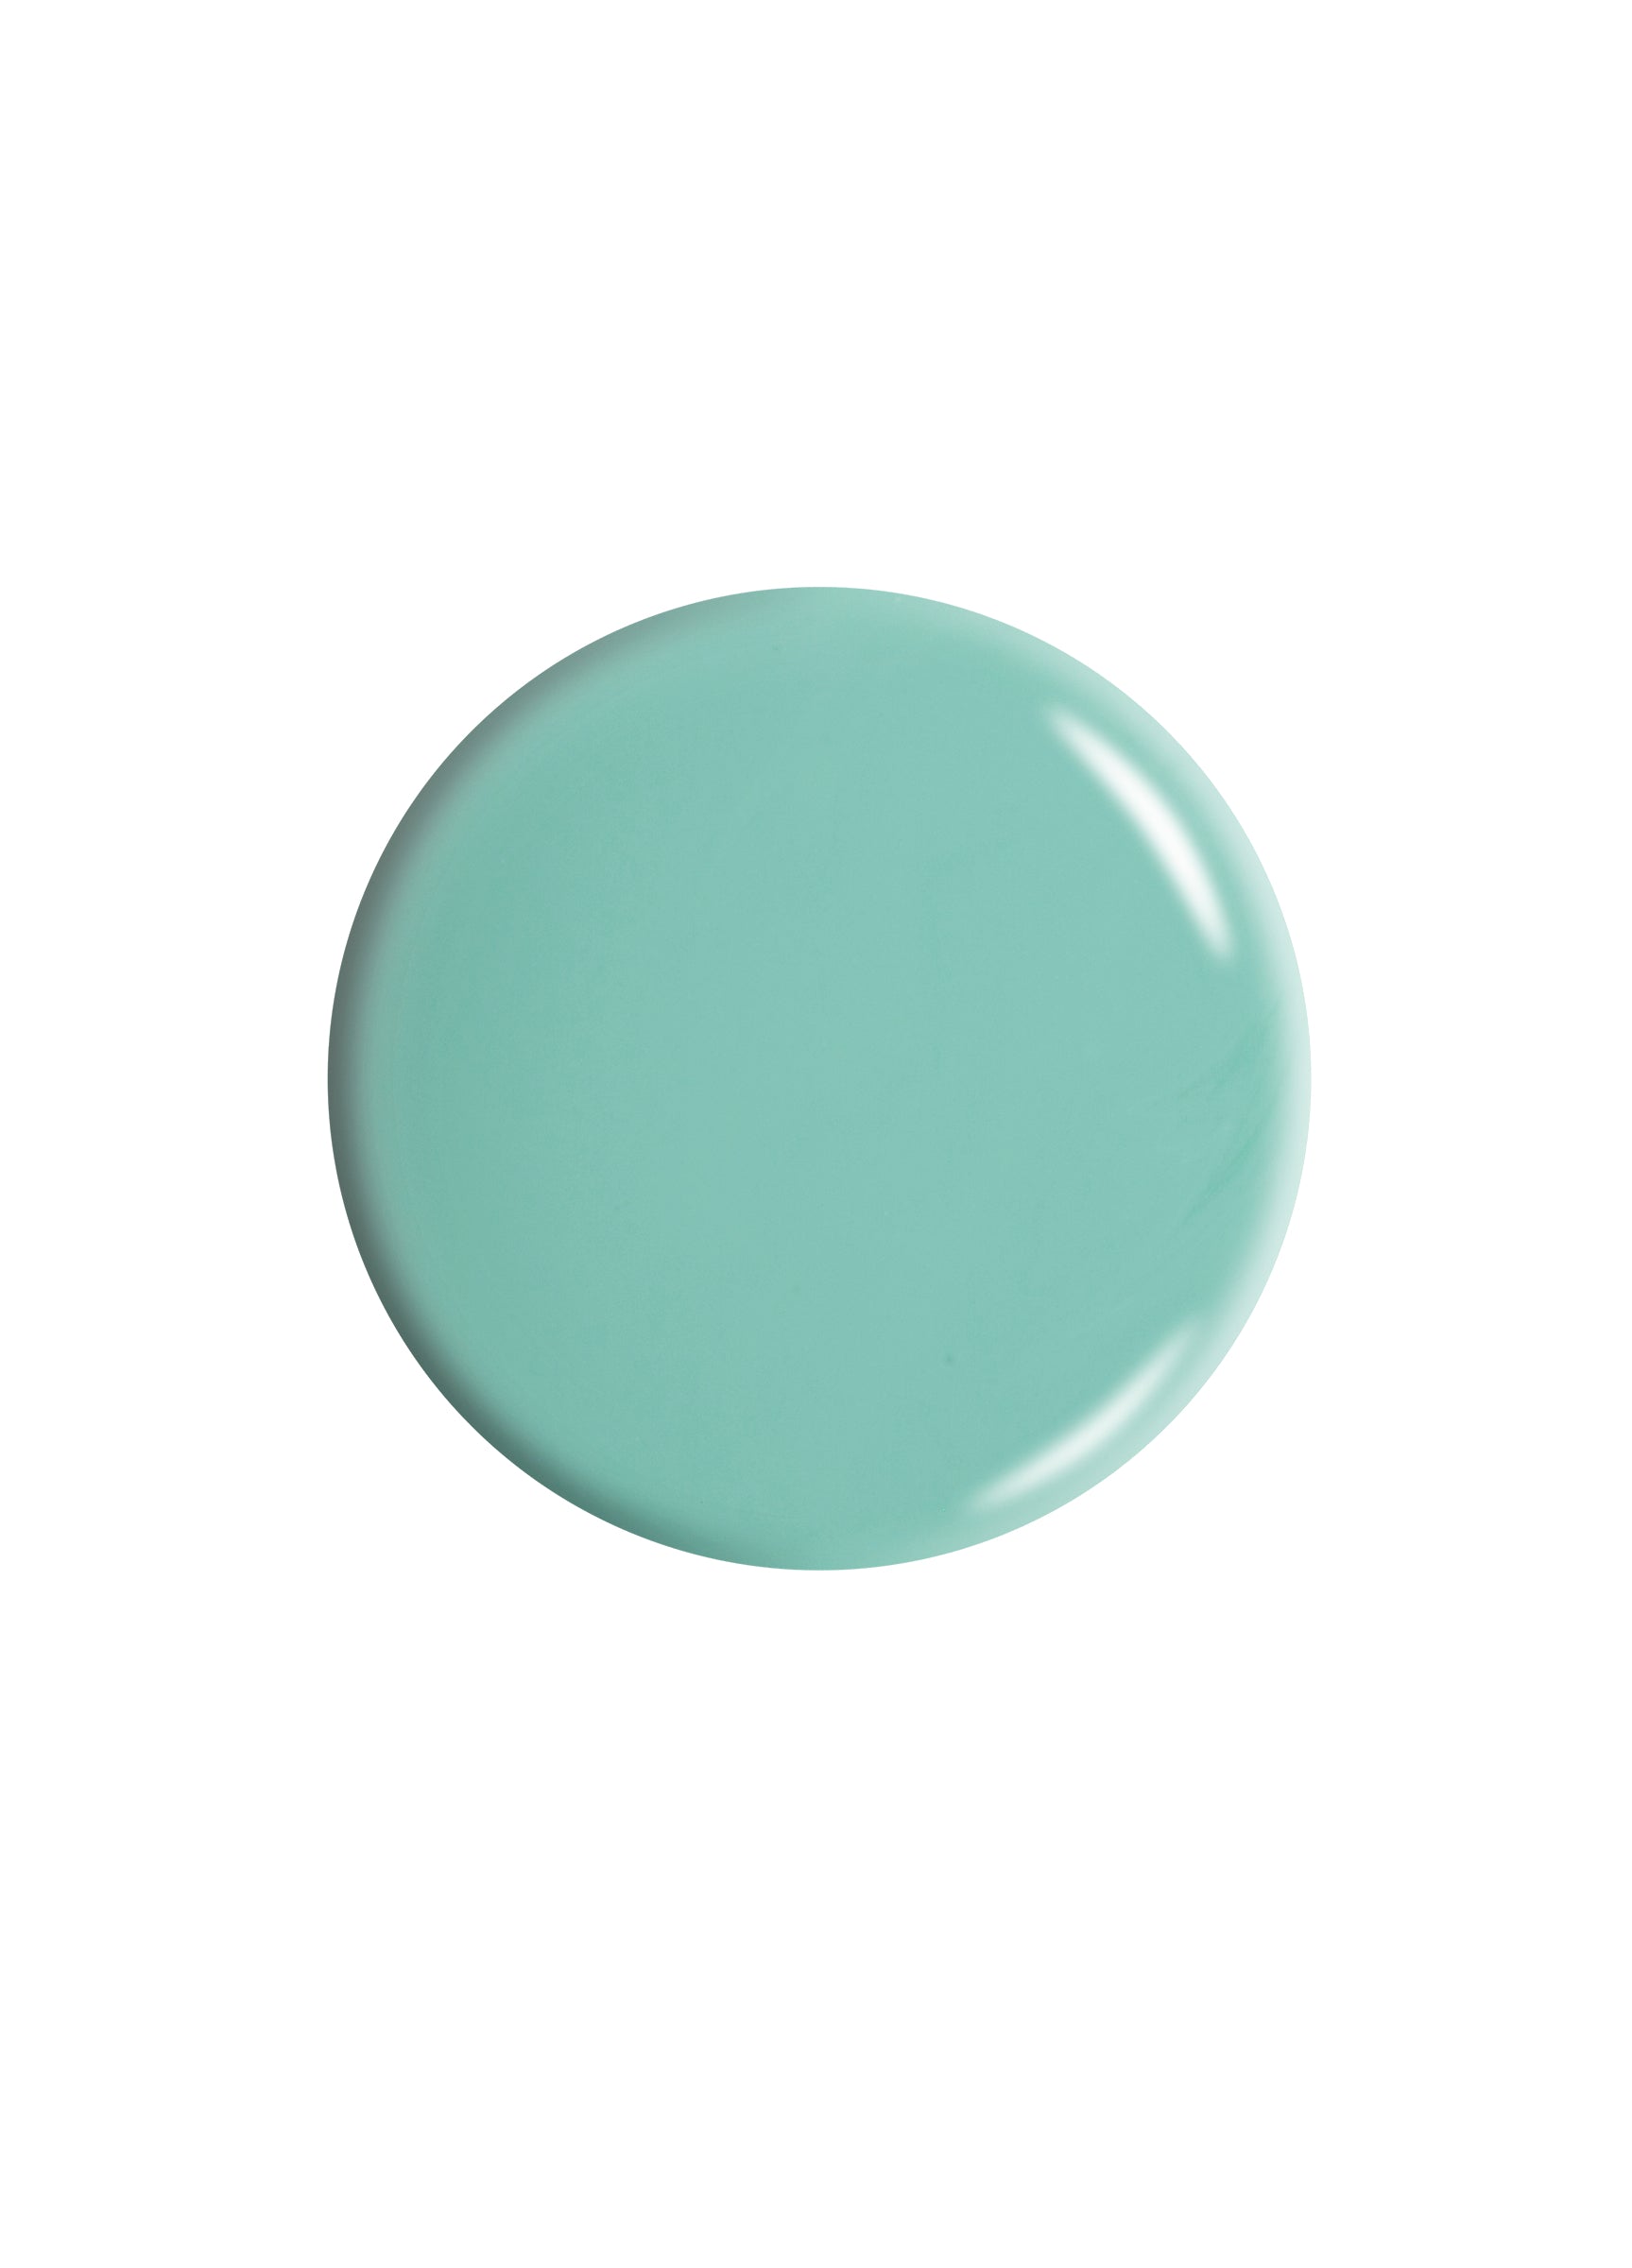 Dr.'s REMEDY Enriched Nail Polish / TRUSTING Turquoise (creme) 15ml